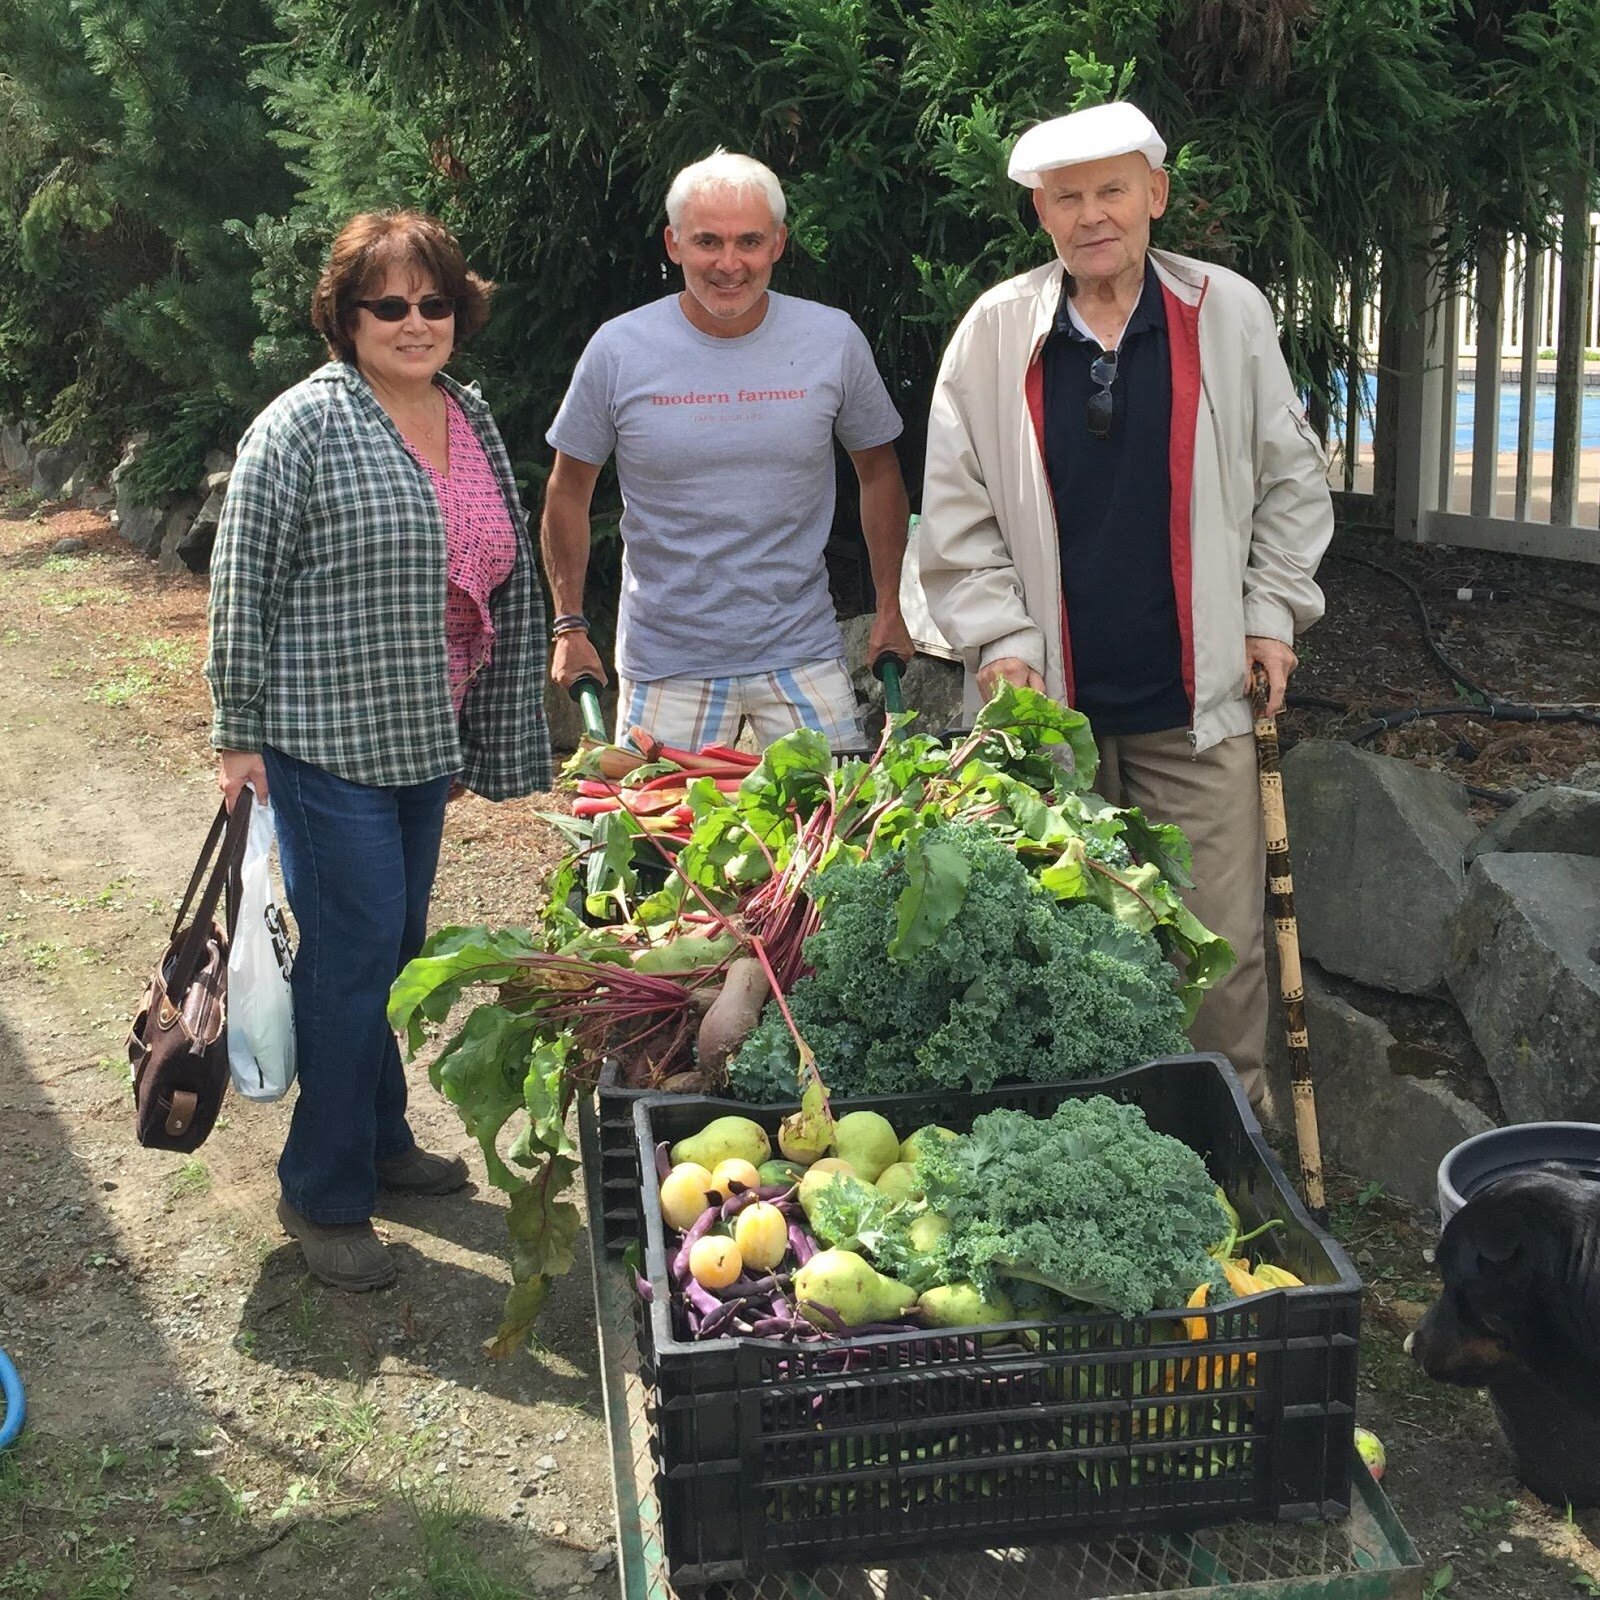 PICTURED: Frank Giustra, Owner and Publisher of Modern Famer, with his garden harvest next to his parents. Photo credit: Frank Giustra.